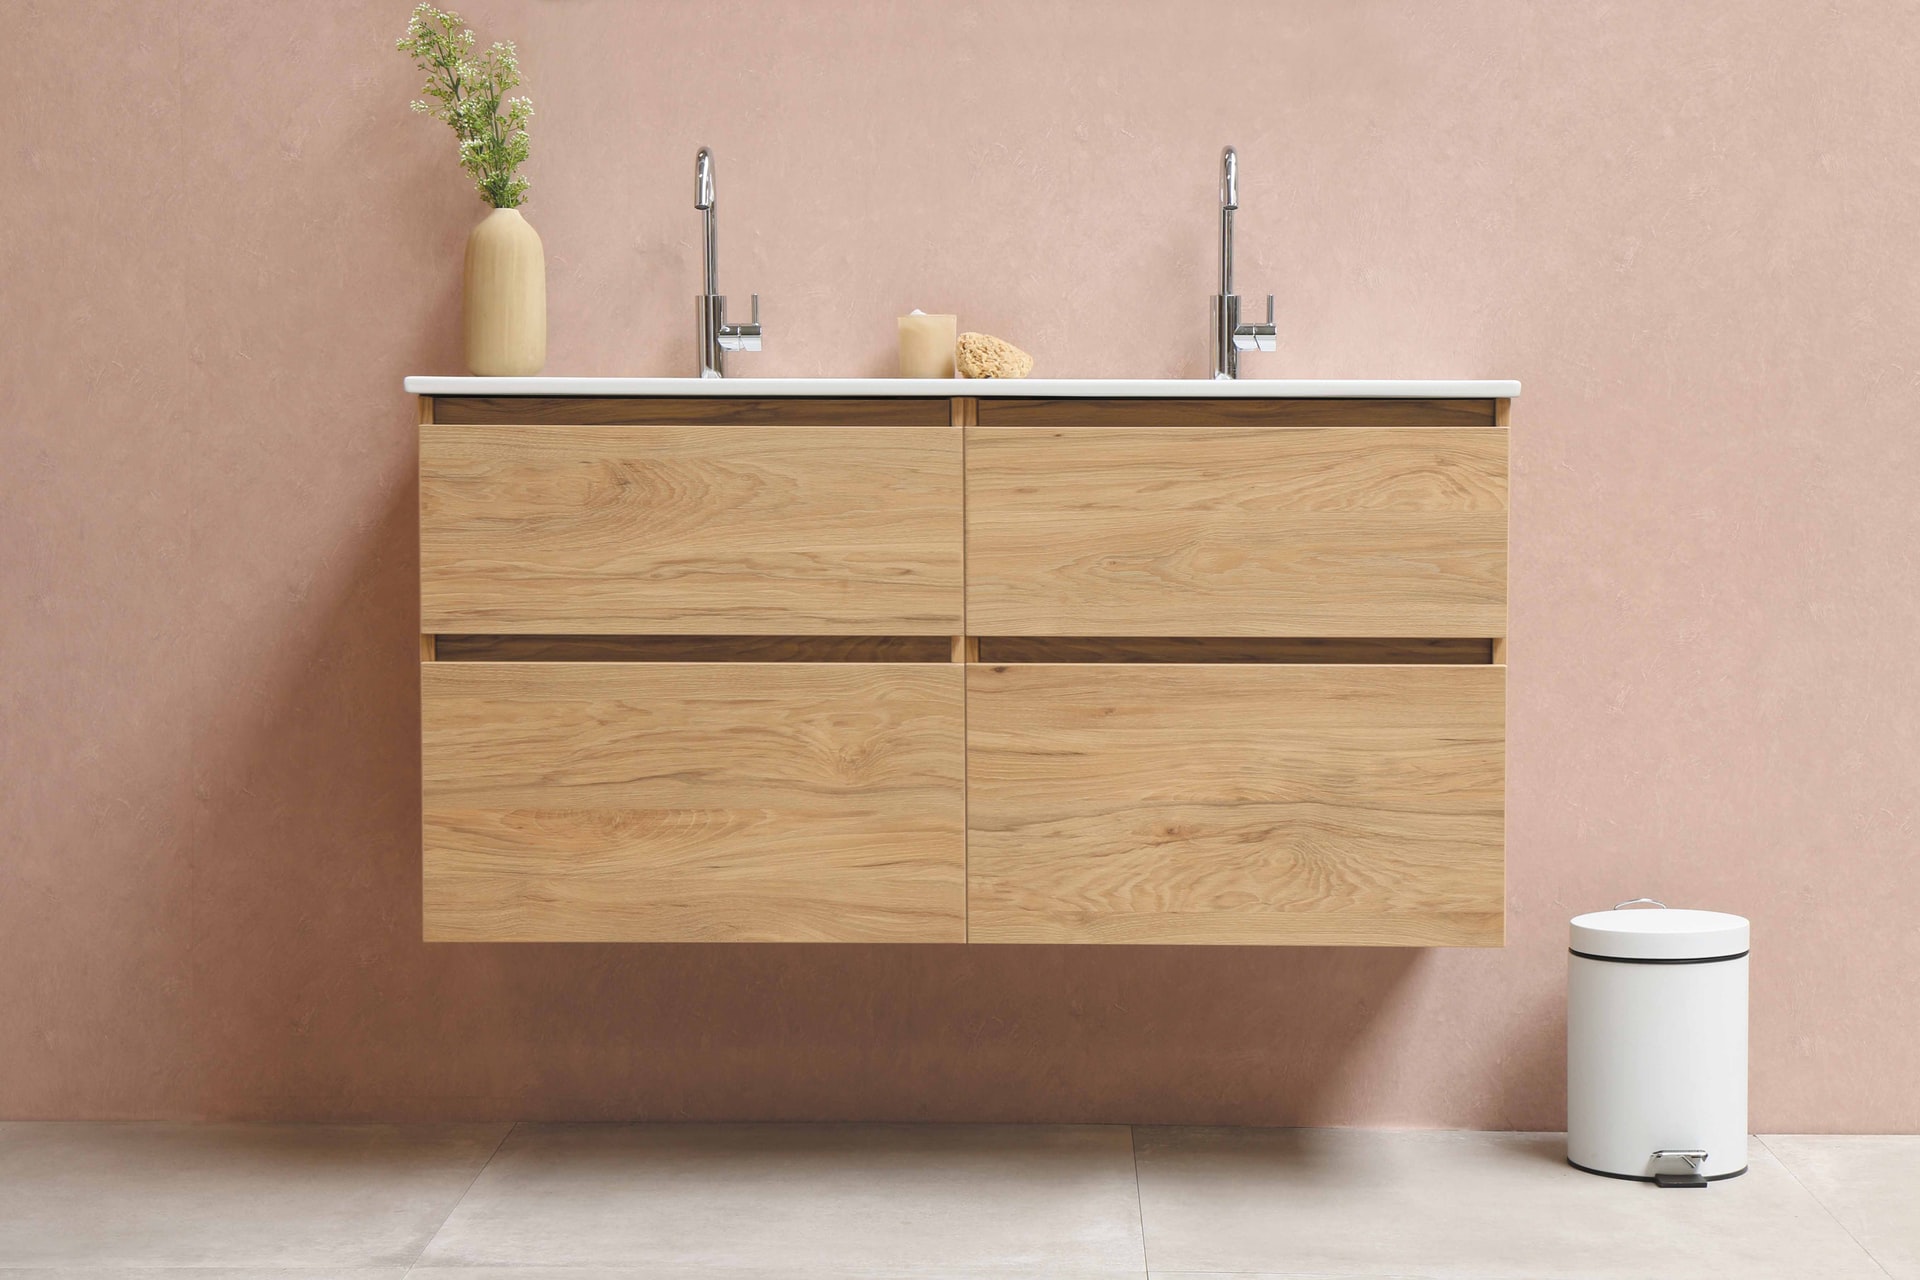 A wooden bathroom cabinet set built into the general design of the room